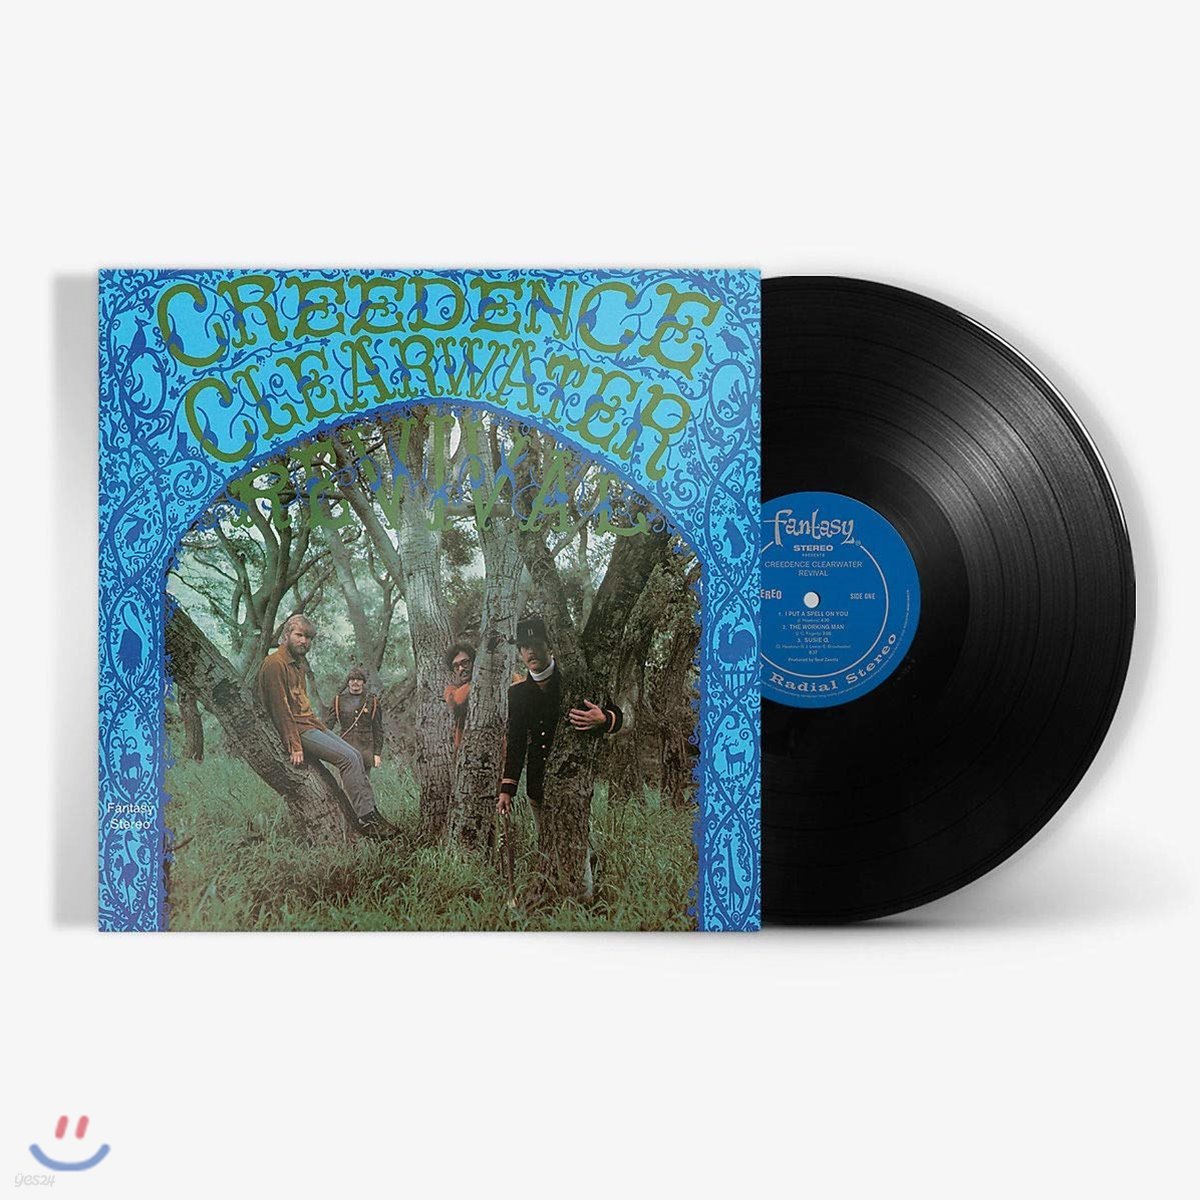 Creedence Clearwater Revival (크리던스 클리어워터 리바이벌) - Creedence Clearwater Revival [LP]